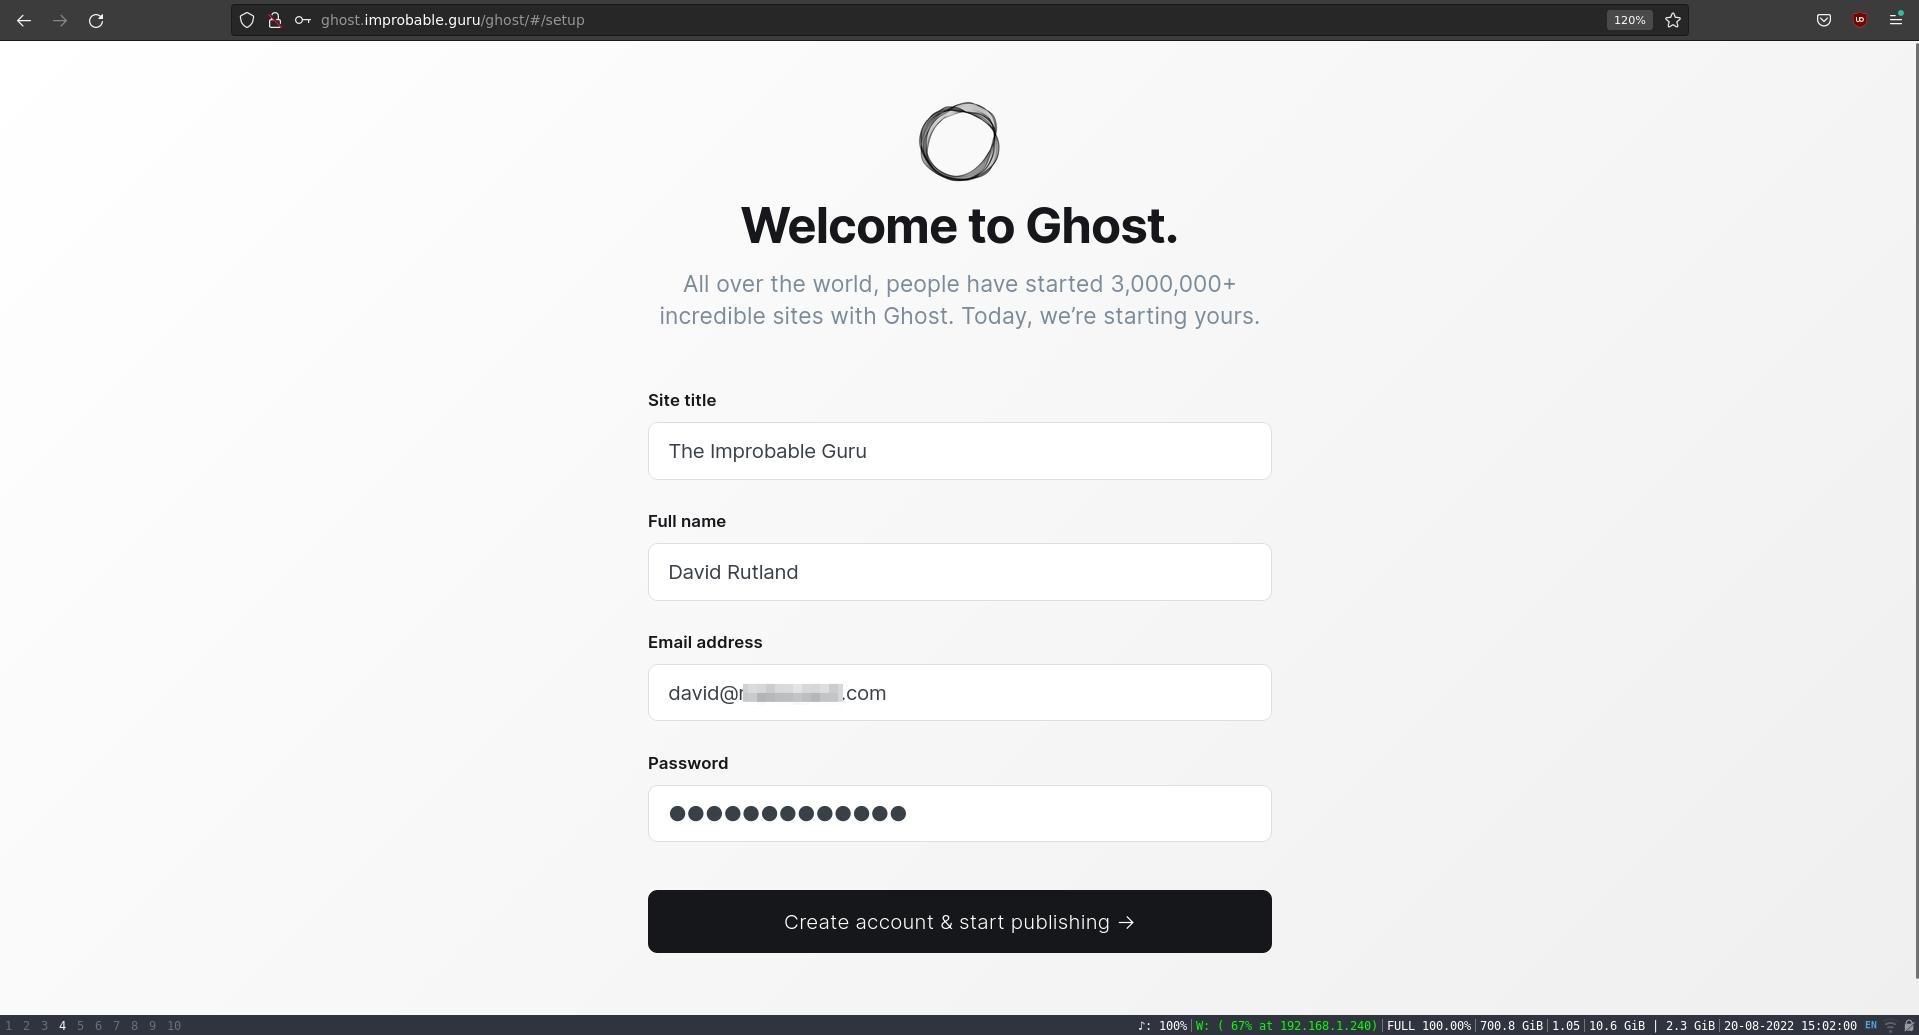 ghost initial account creation reading, "welcome to Ghost"